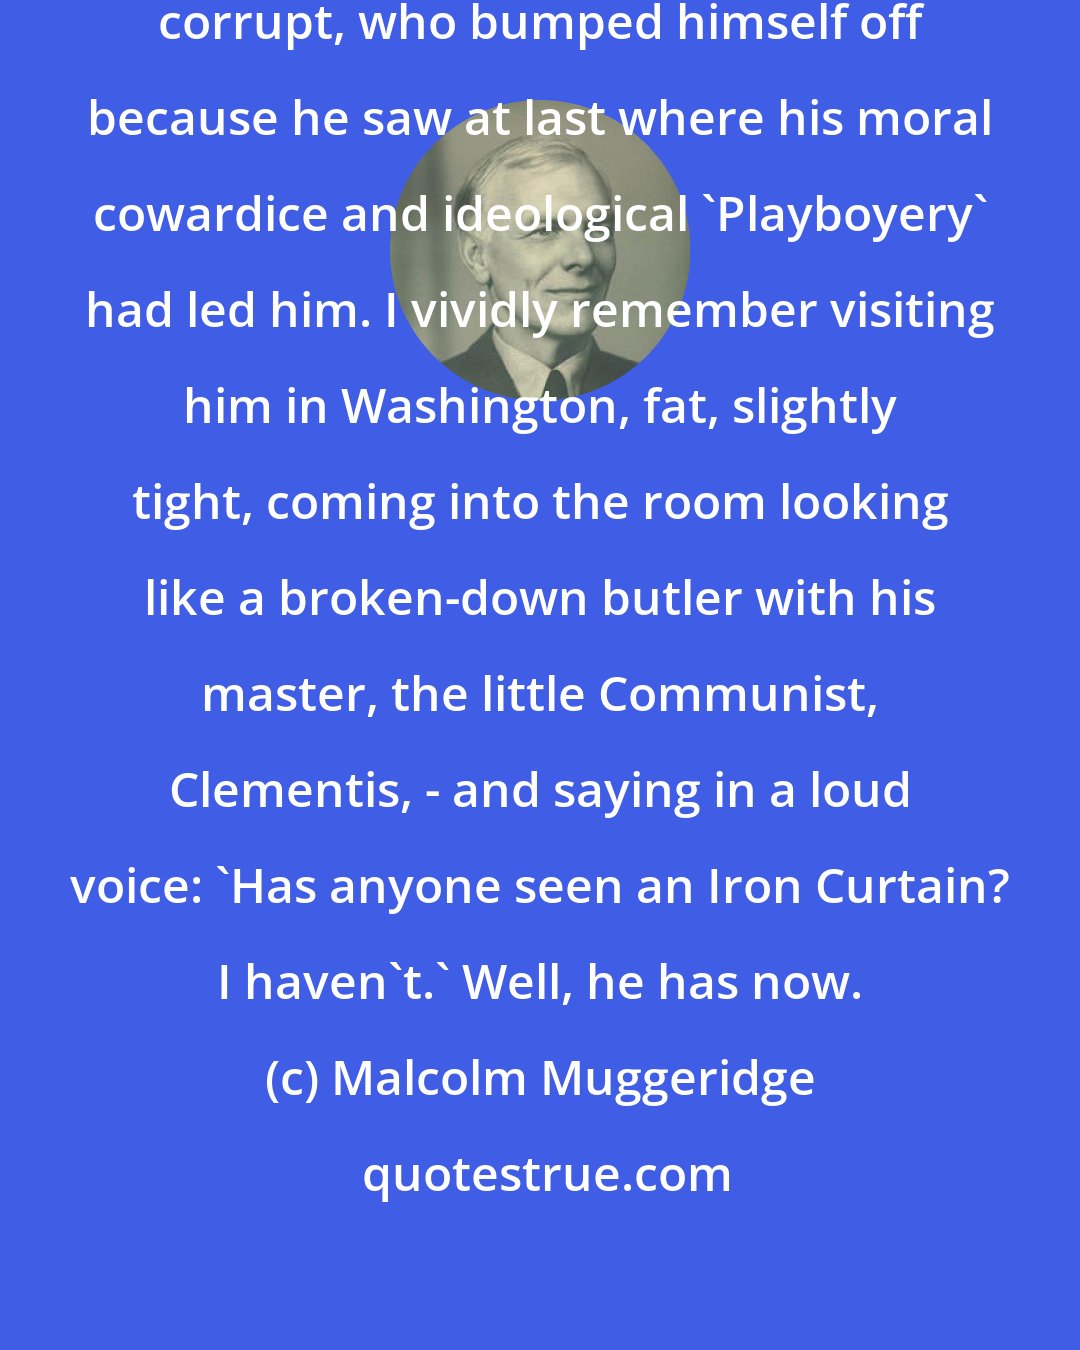 Malcolm Muggeridge: In my view, Jan Masaryk was thoroughly corrupt, who bumped himself off because he saw at last where his moral cowardice and ideological 'Playboyery' had led him. I vividly remember visiting him in Washington, fat, slightly tight, coming into the room looking like a broken-down butler with his master, the little Communist, Clementis, - and saying in a loud voice: 'Has anyone seen an Iron Curtain? I haven't.' Well, he has now.